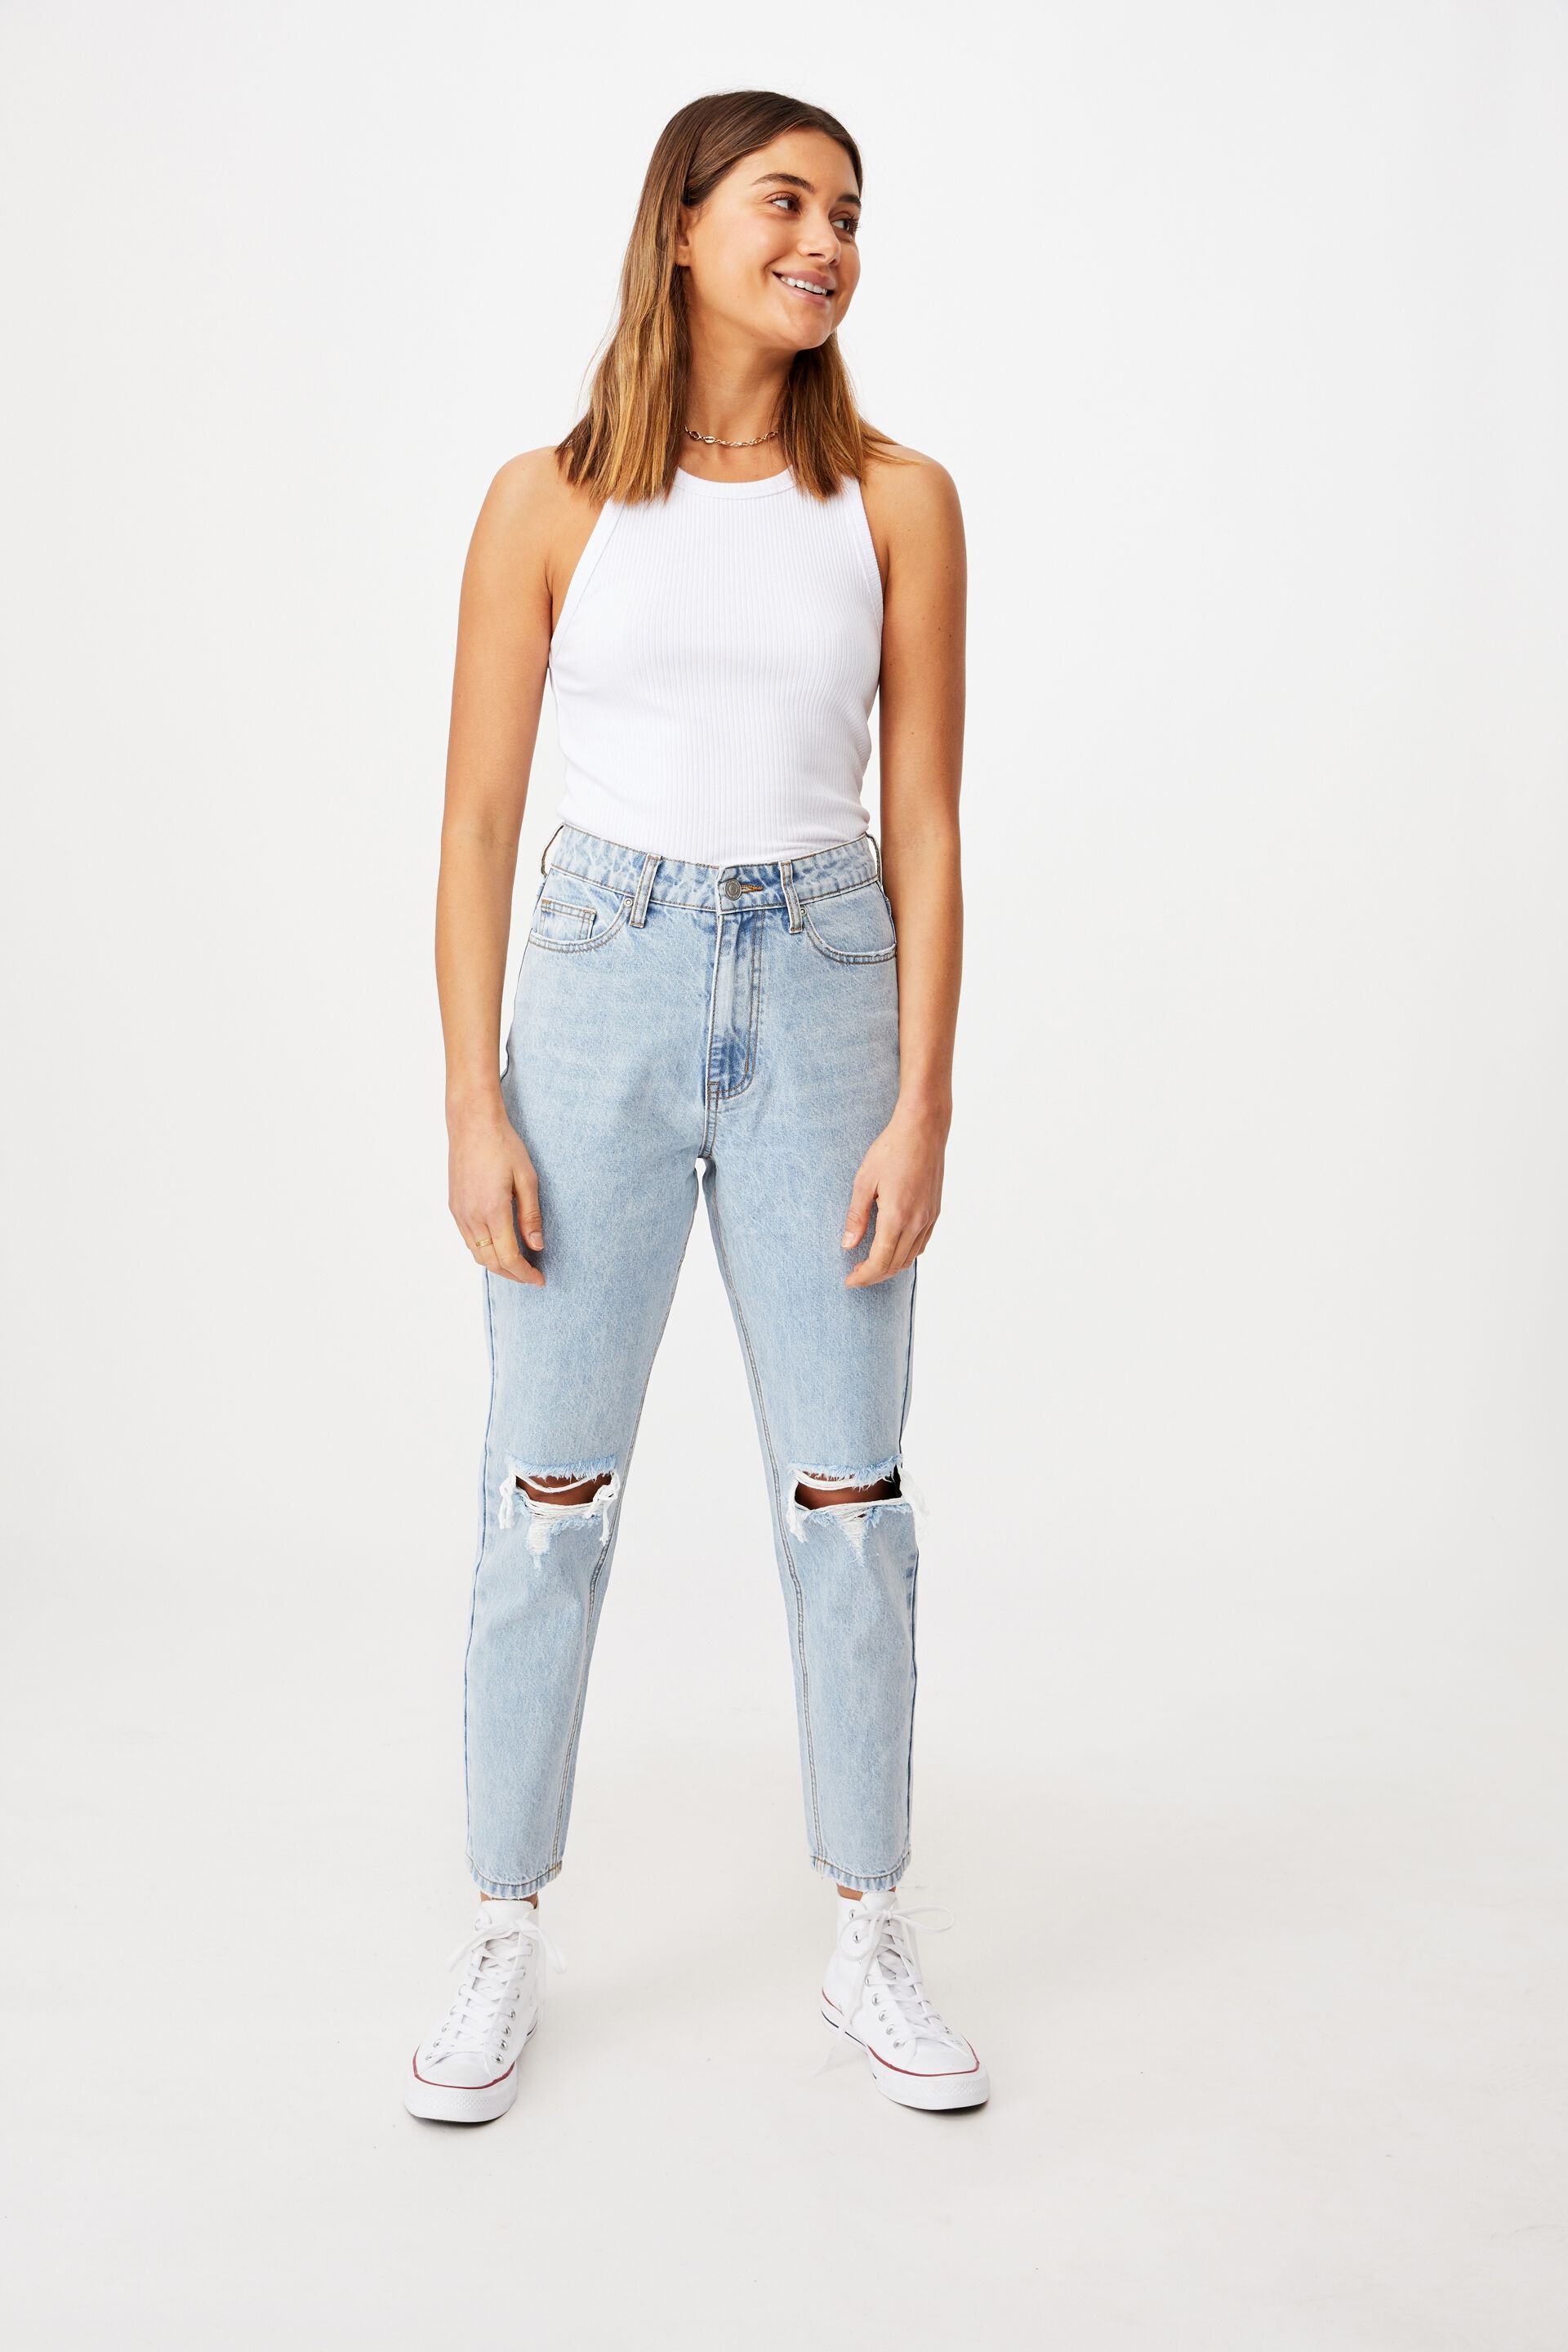 supre ripped jeans